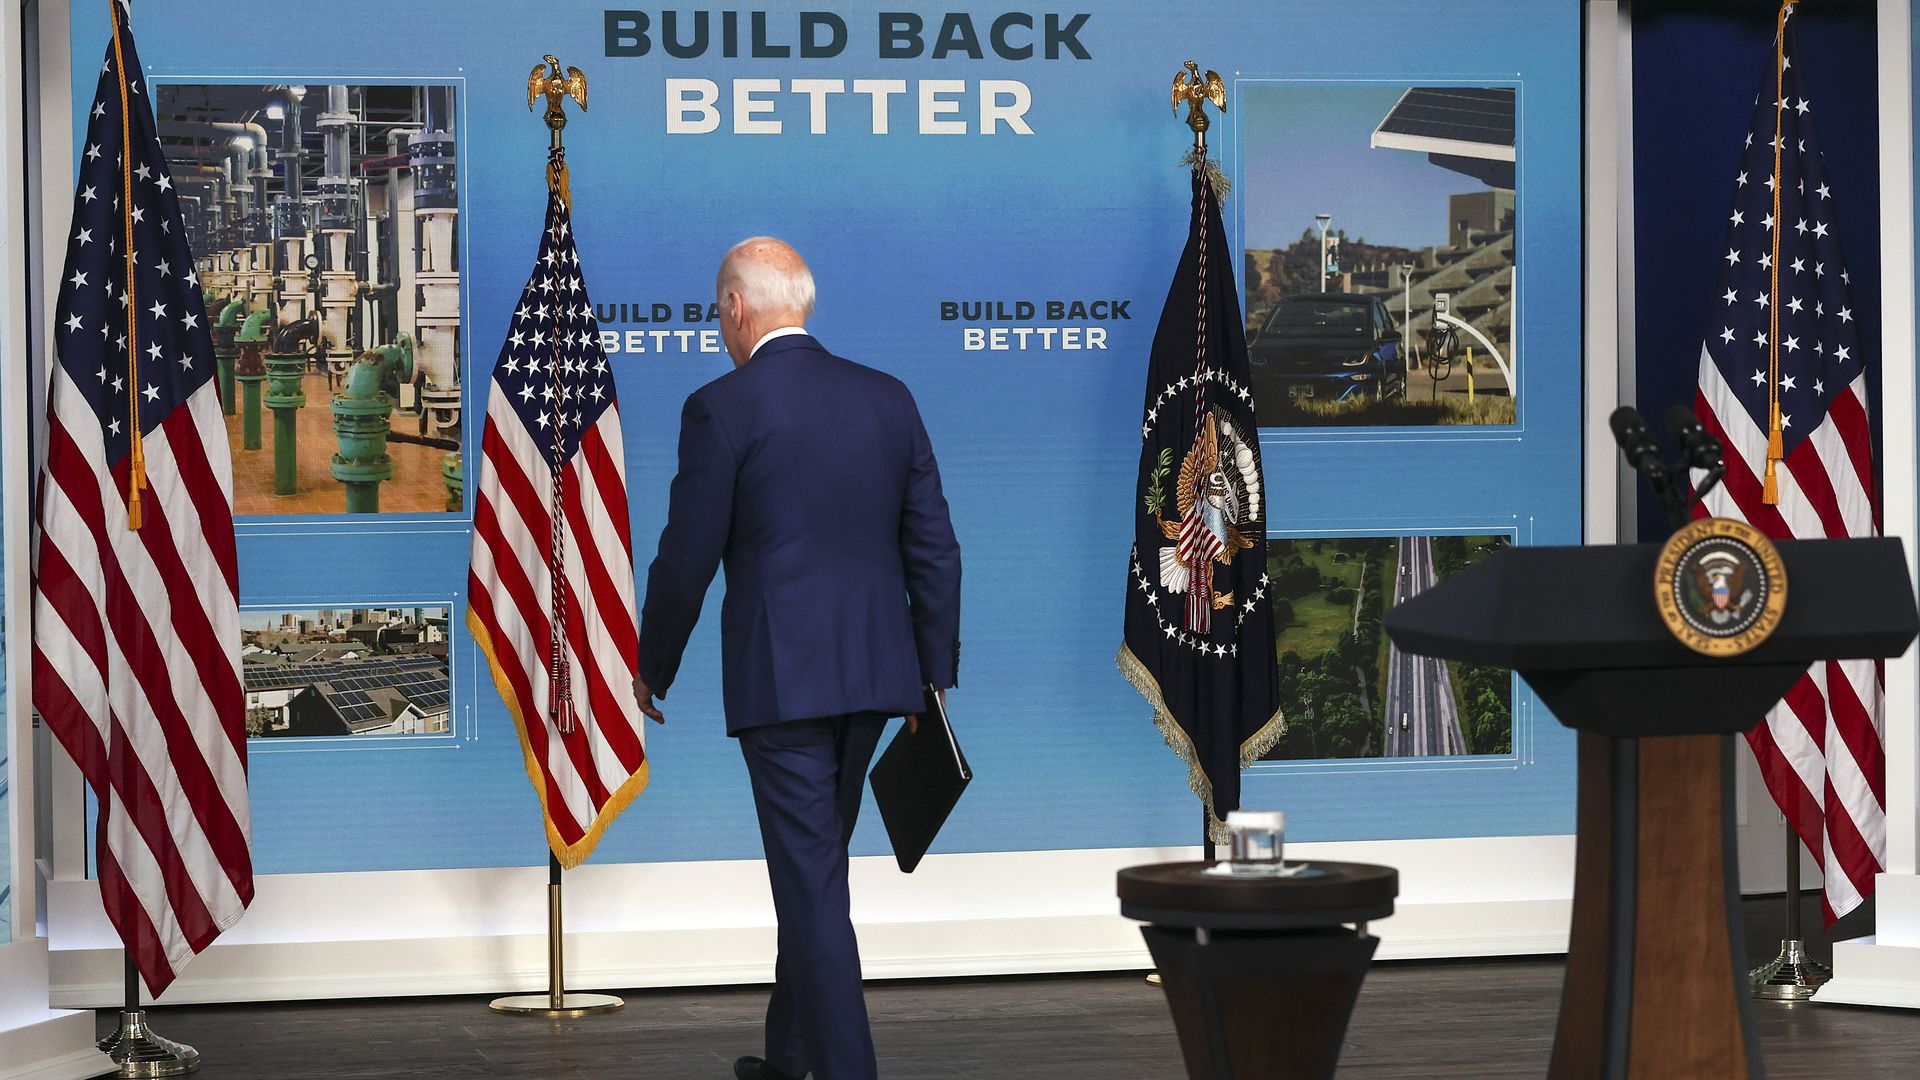 A view of President Biden from behind walking away from a podium with a "Build Back Better" backdrop